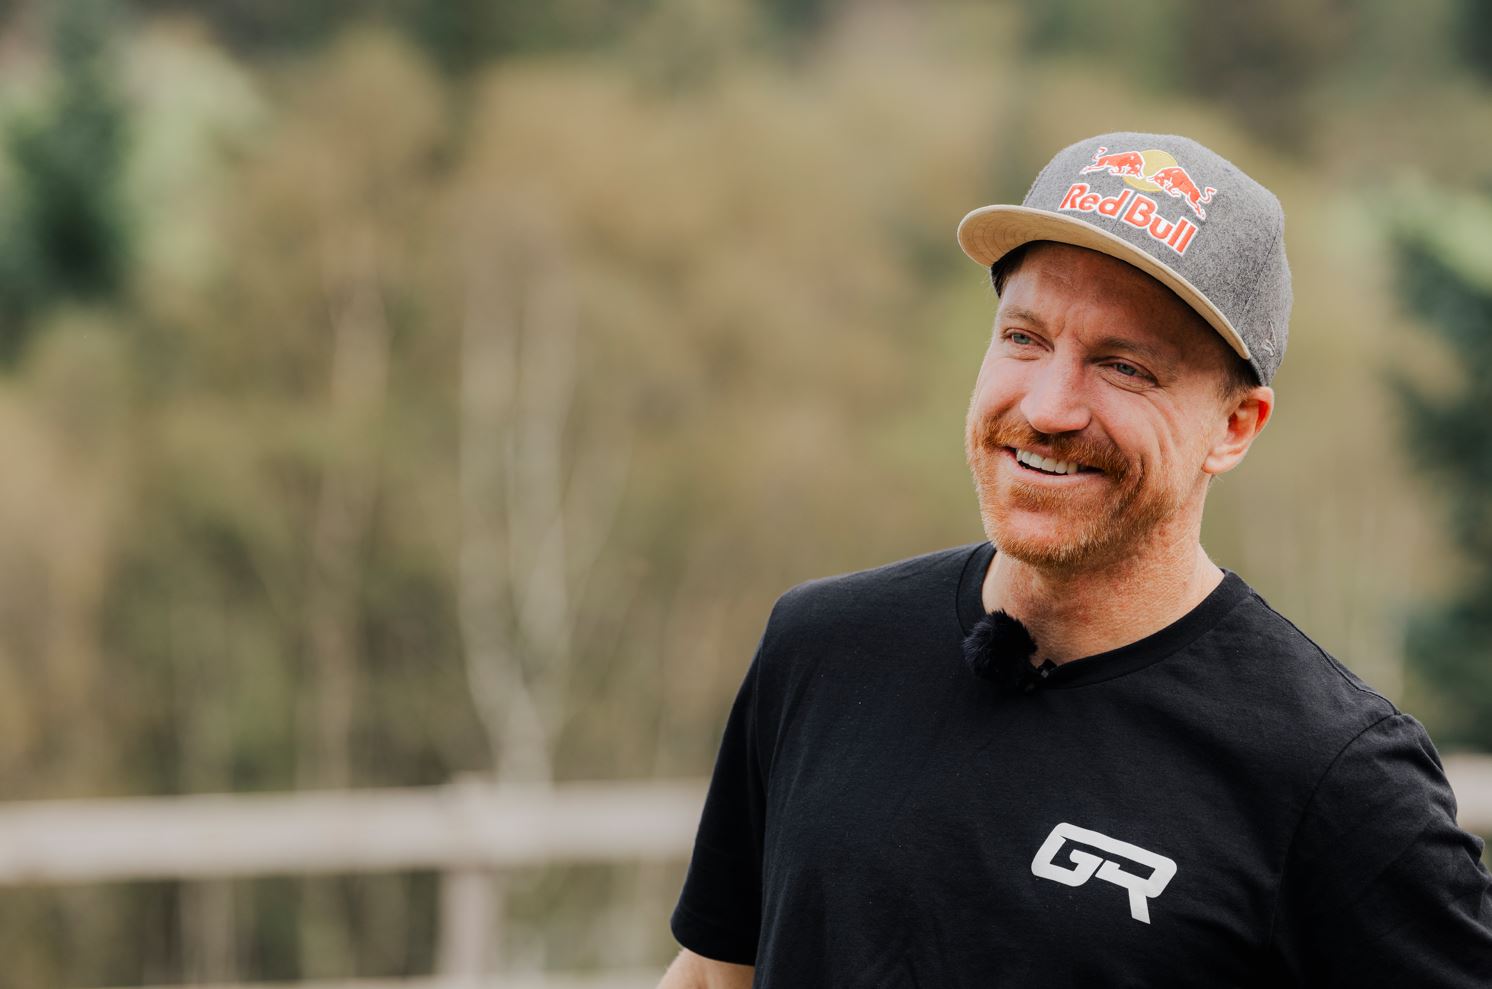 AARON GWIN CONFIRMED AS DOWNHILL AMBASSADOR FOR THE WHOOP UCI MOUNTAIN BIKE WORLD SERIES